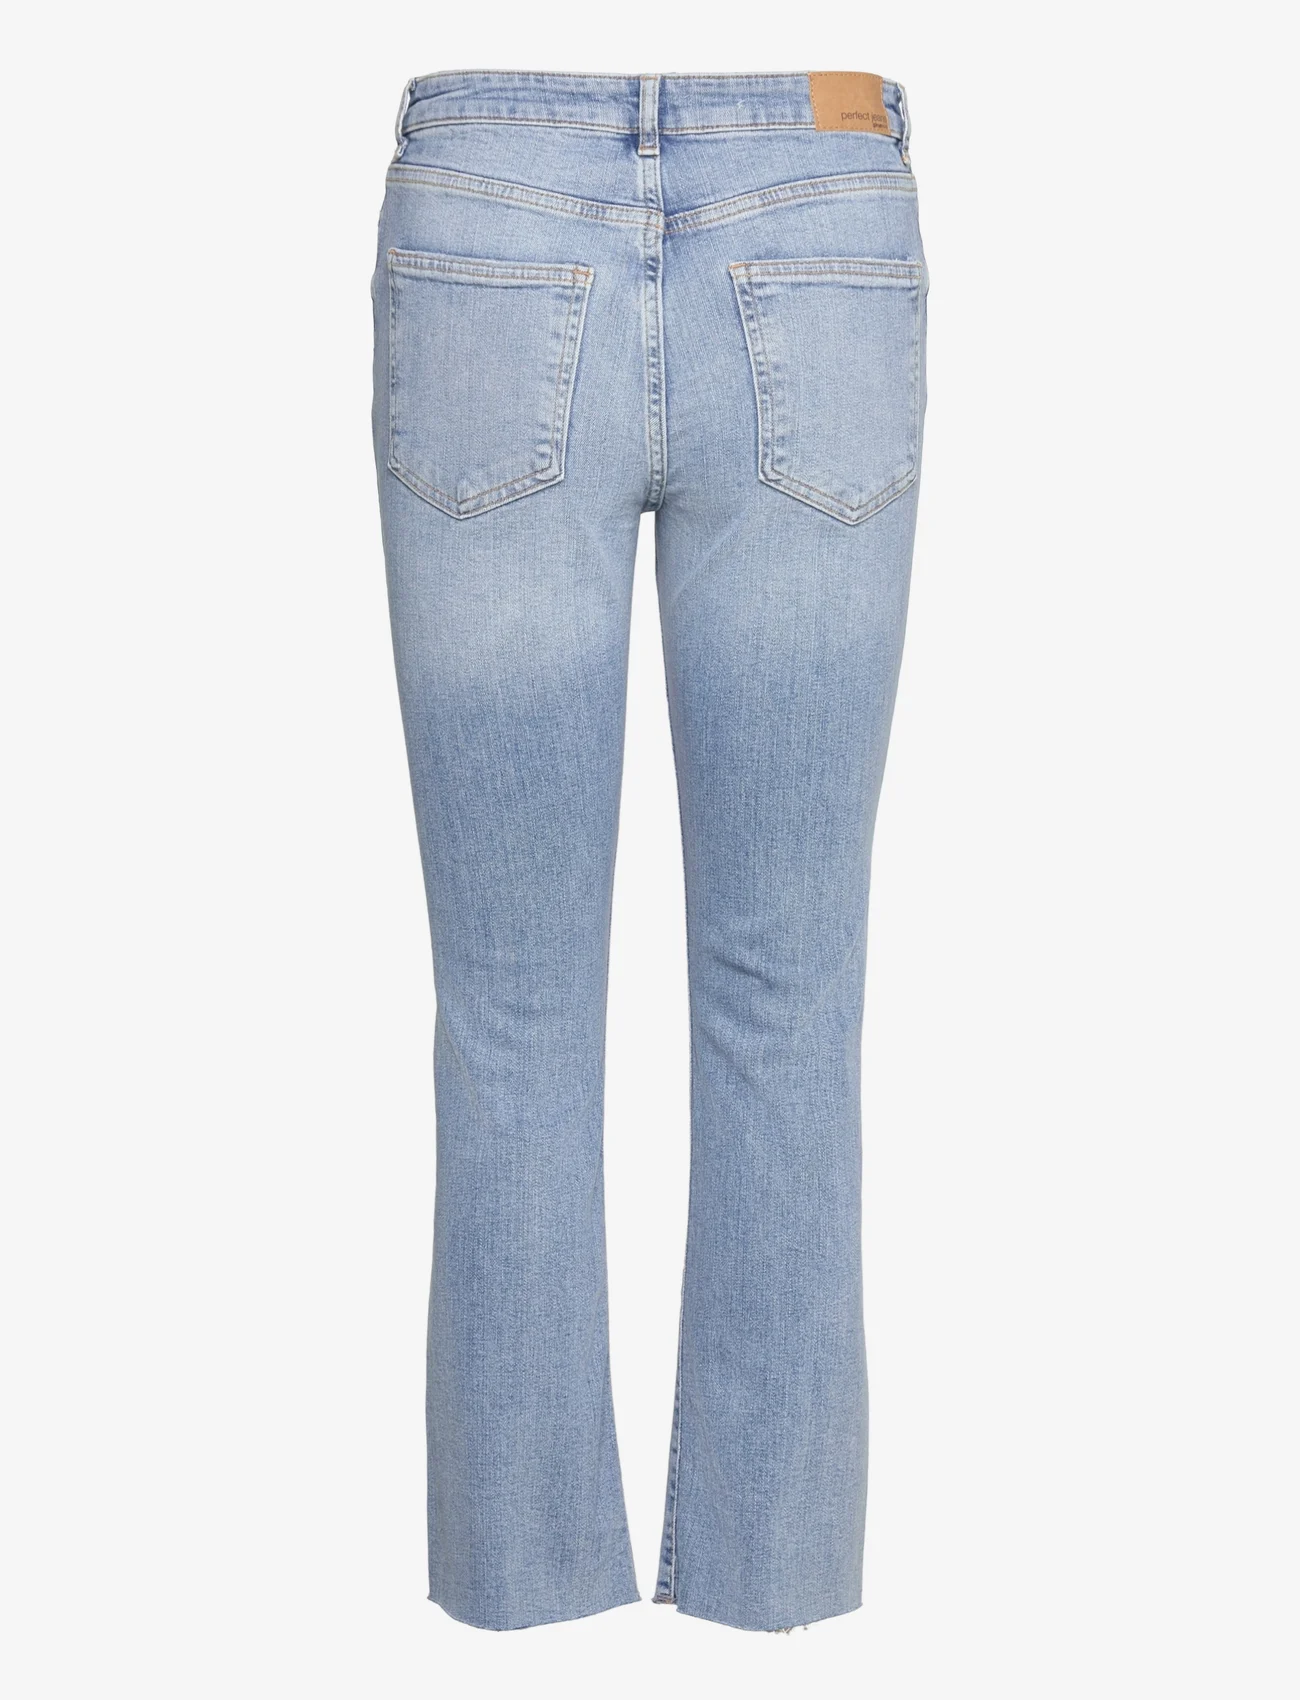 Gina Tricot - Ylva kick flare jeans - bootcut jeans - classic blue (4029) - 1